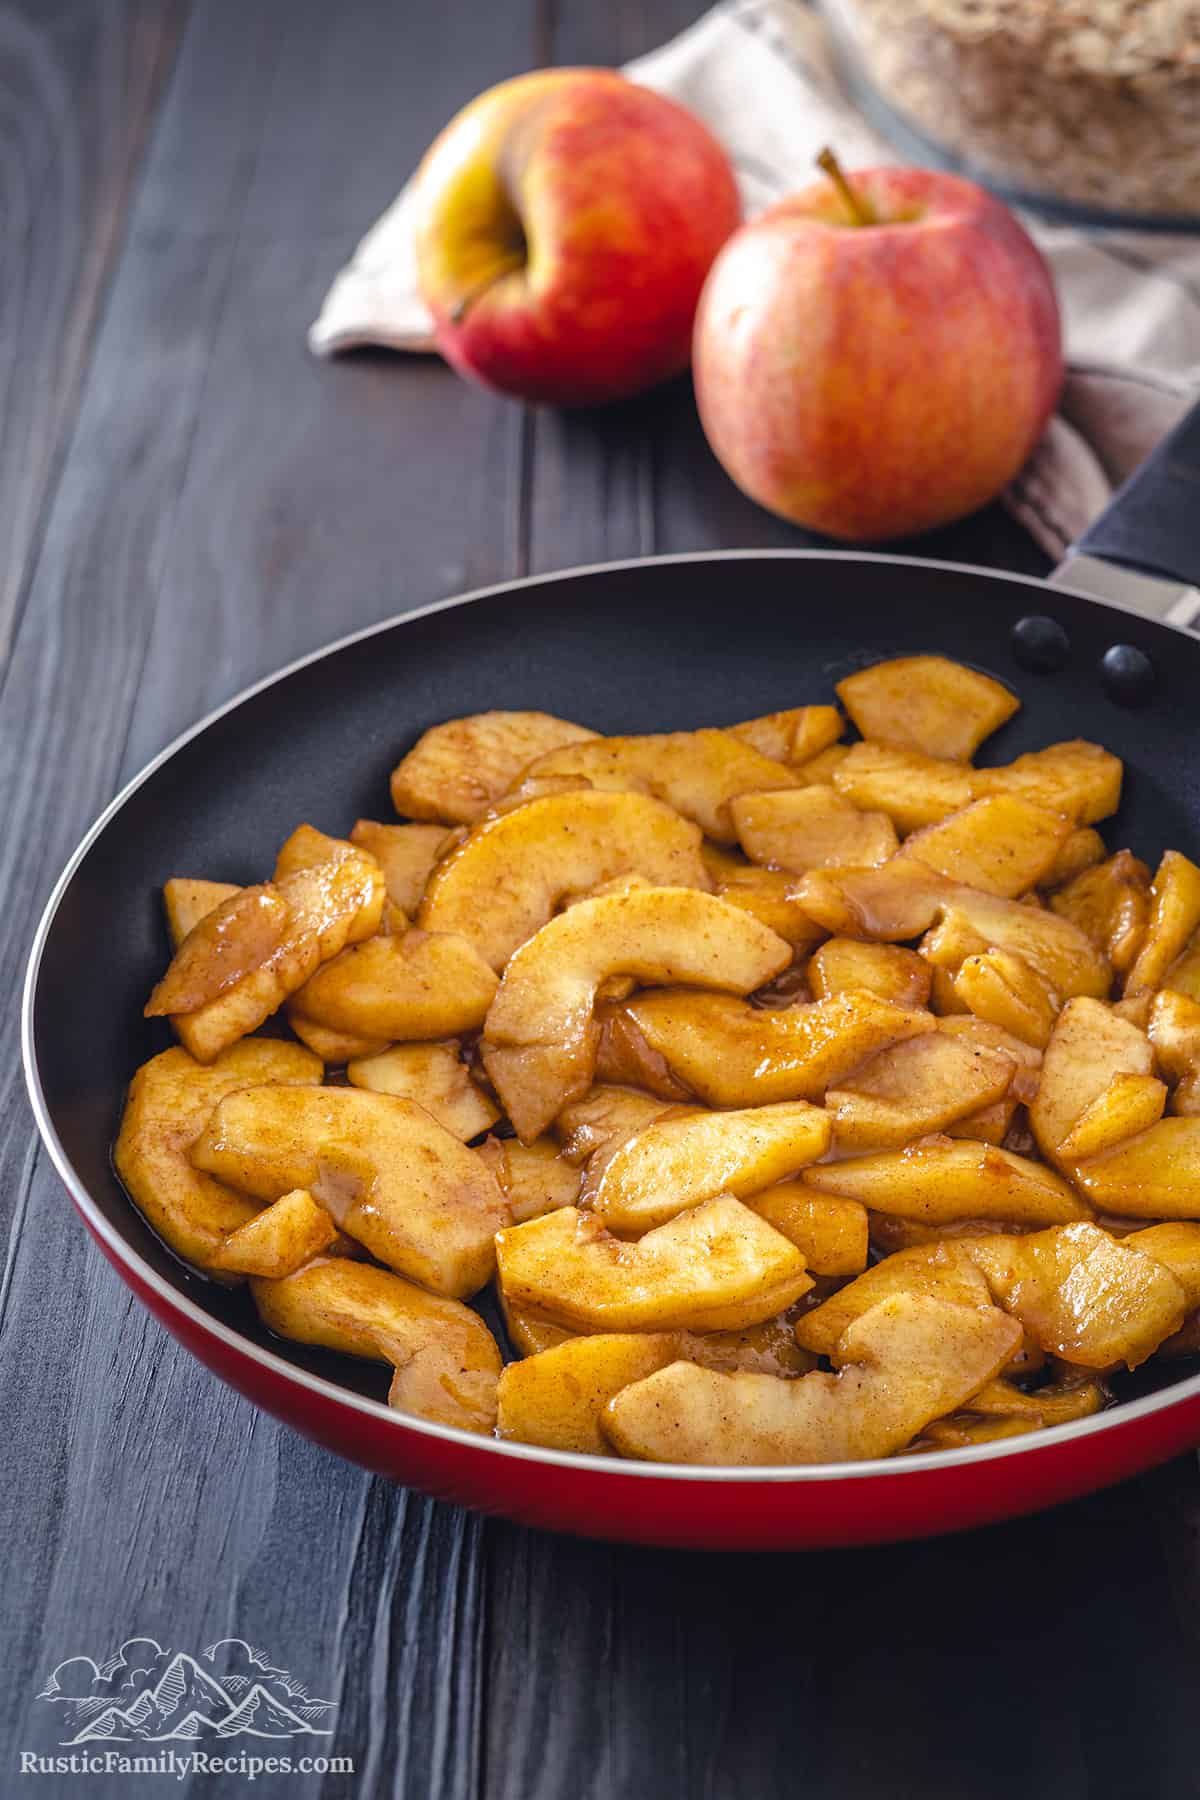 Cooked apples in a skillet